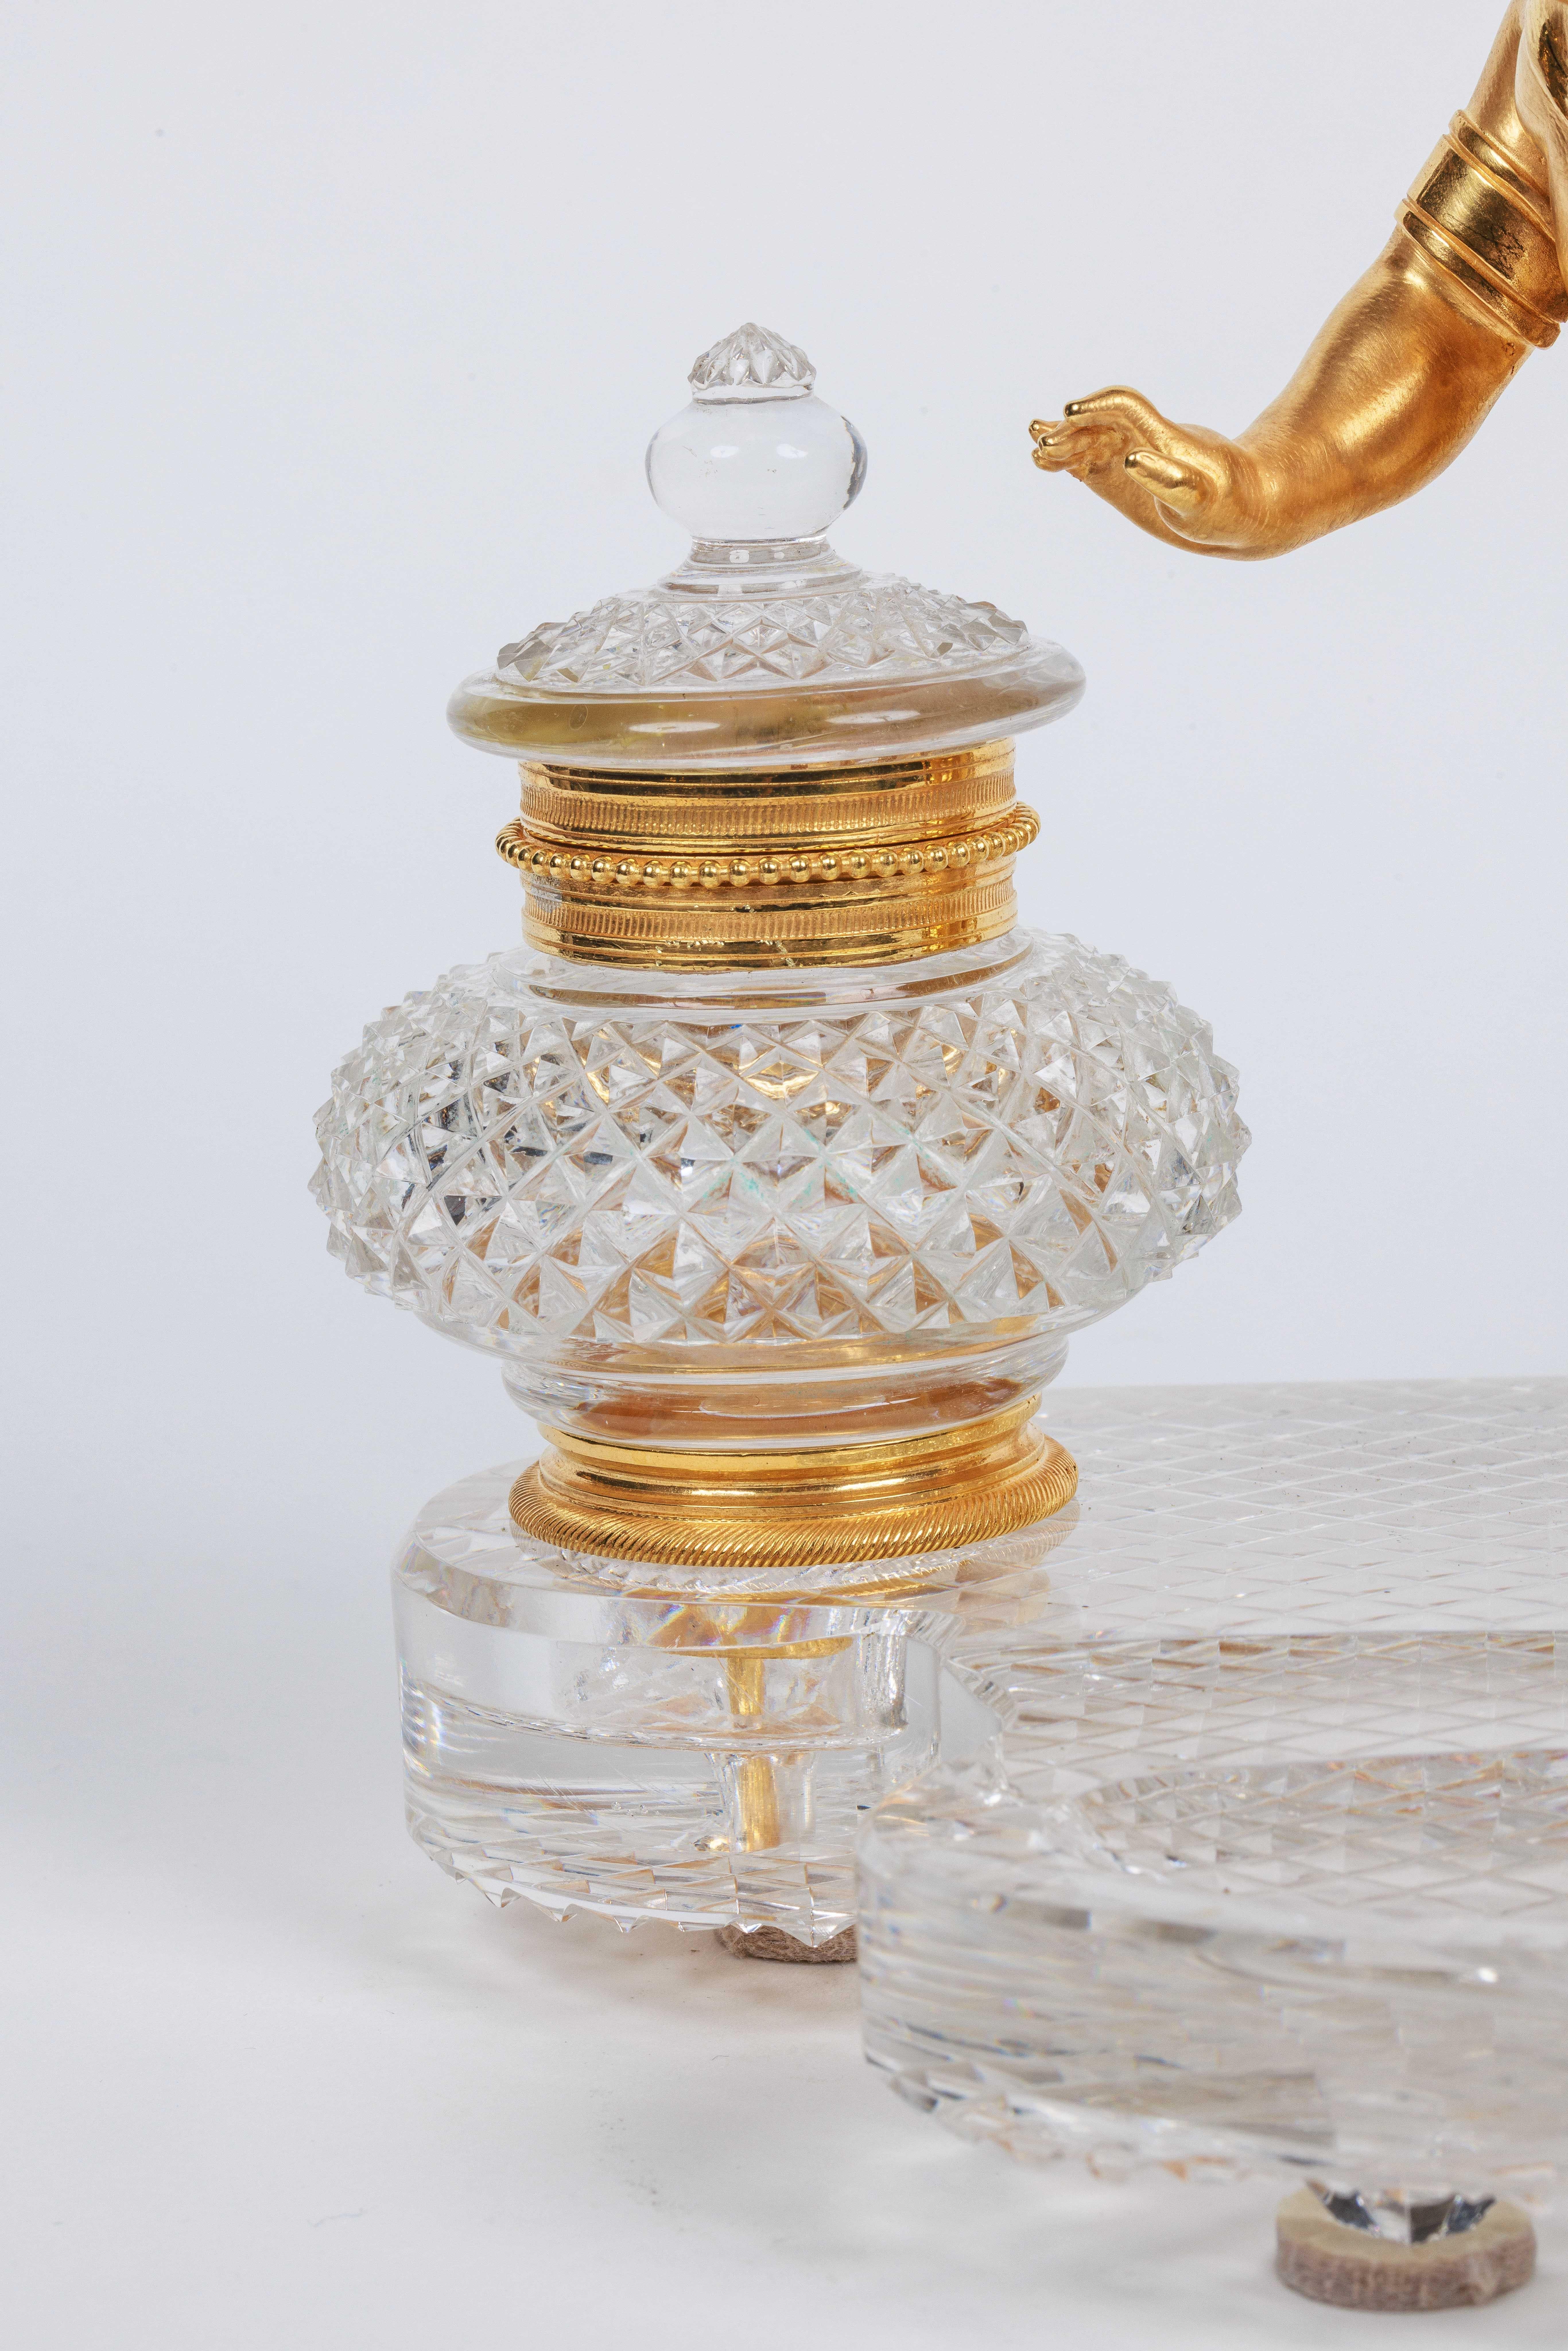 Rare French Ormolu and Diamond-Cut Crystal Figural Inkwell Encrier by Baccarat For Sale 1